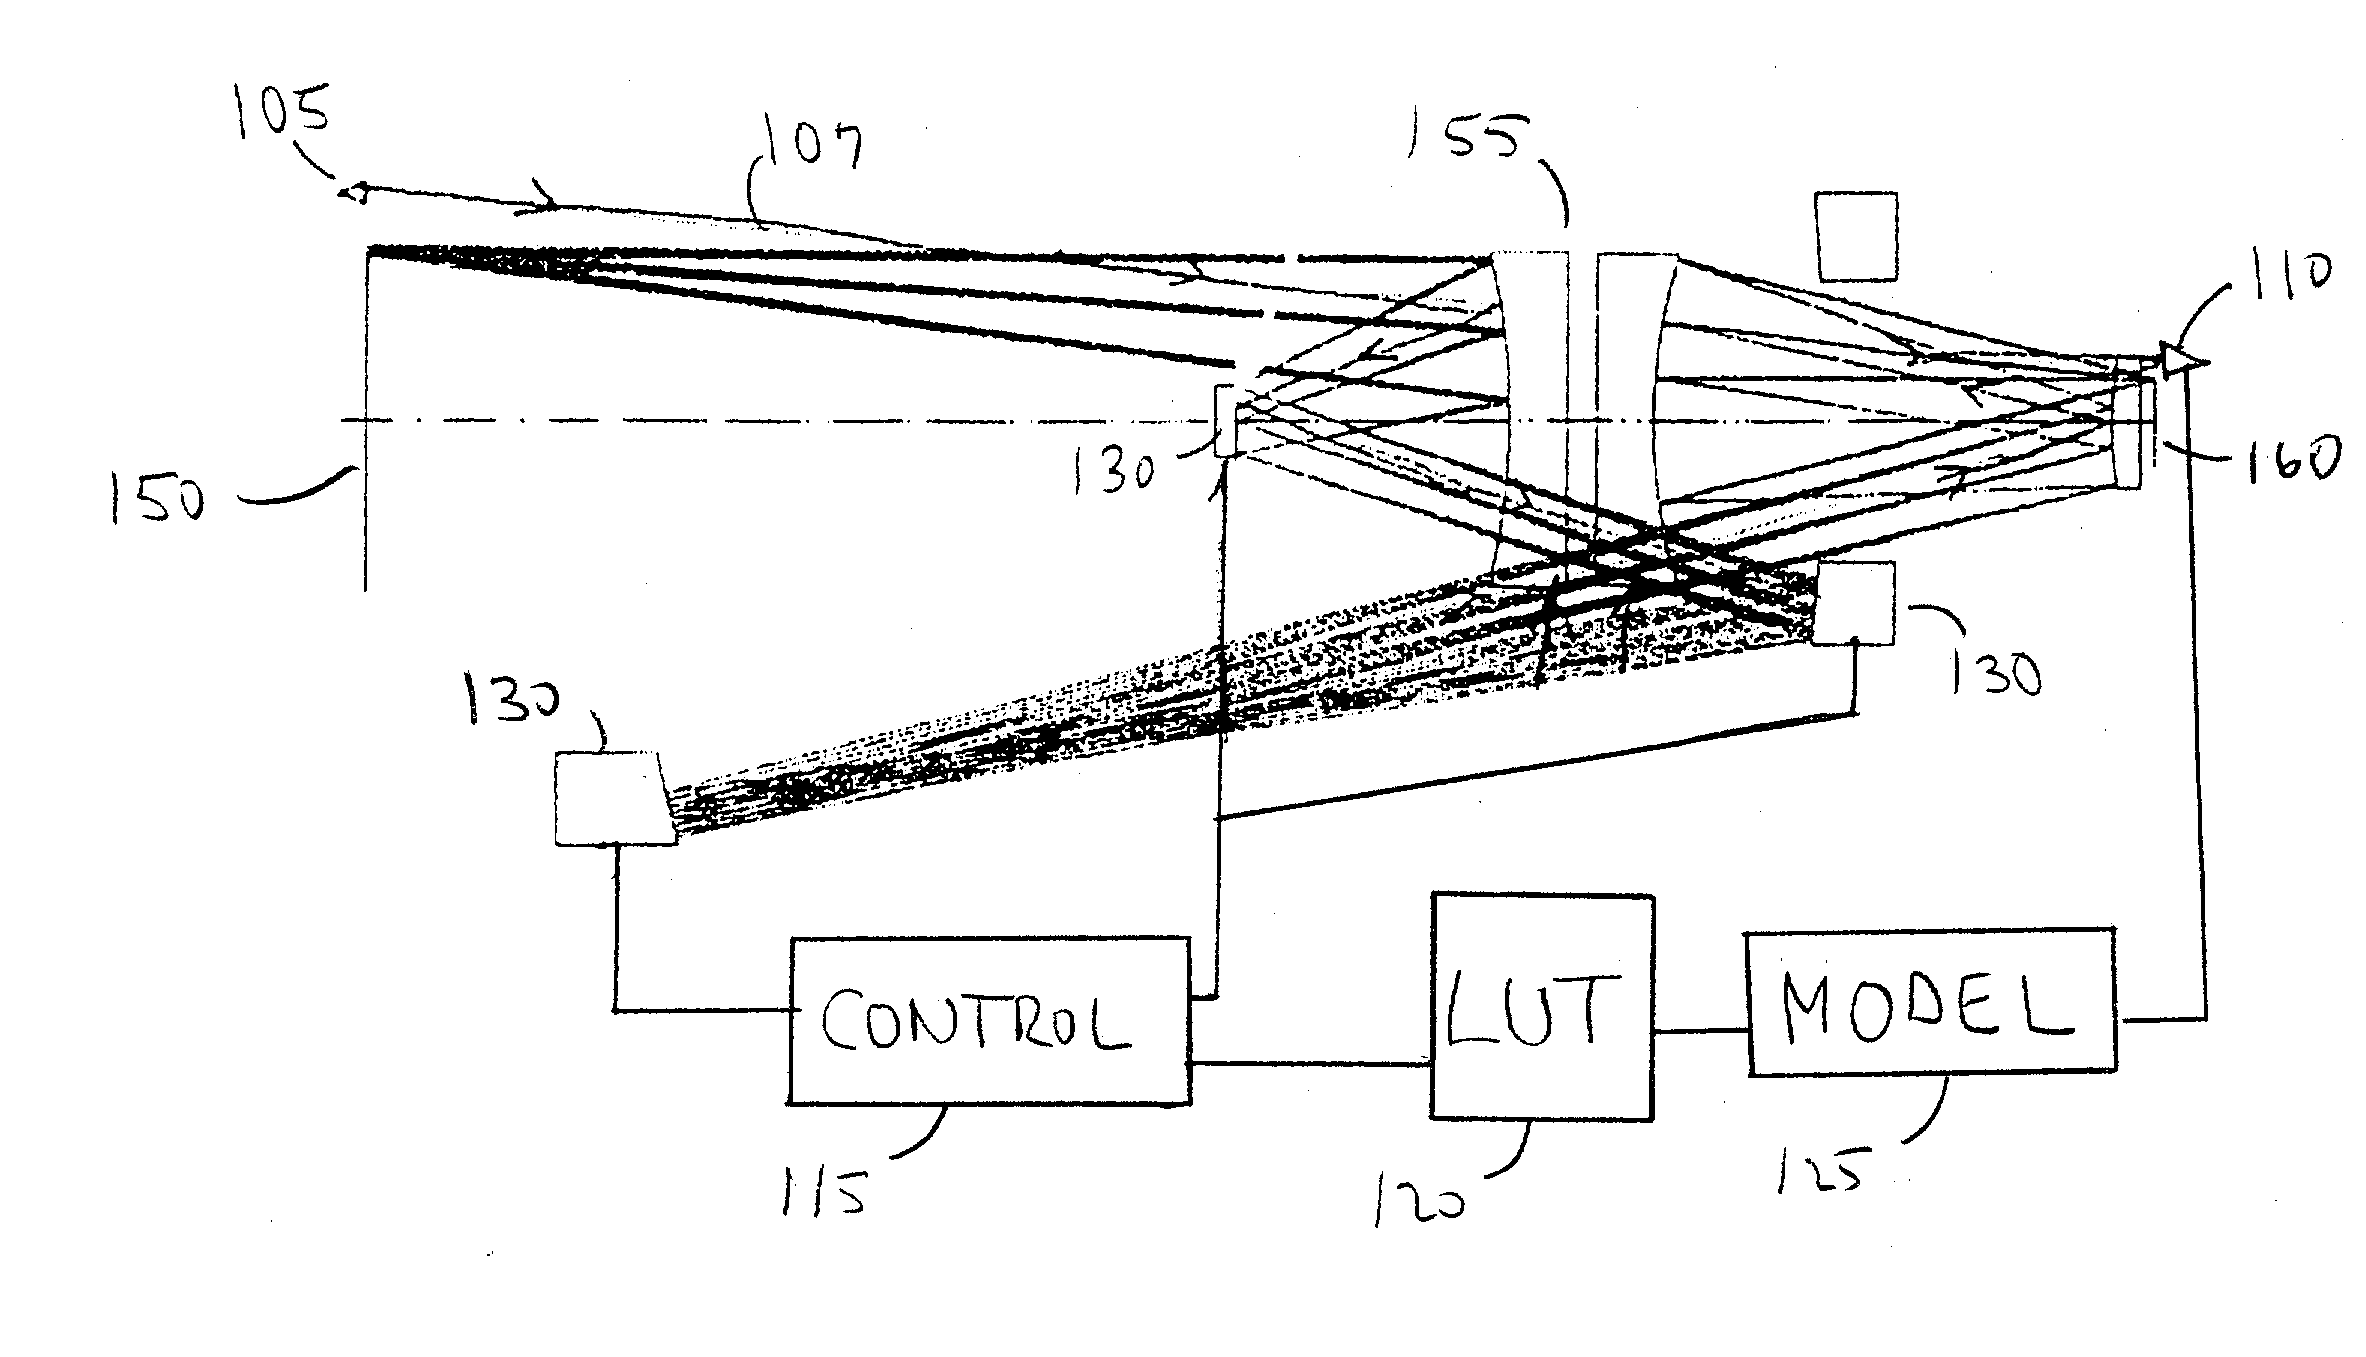 Adaptive optic with discrete actuators for continuous deformation of a deformable mirror system